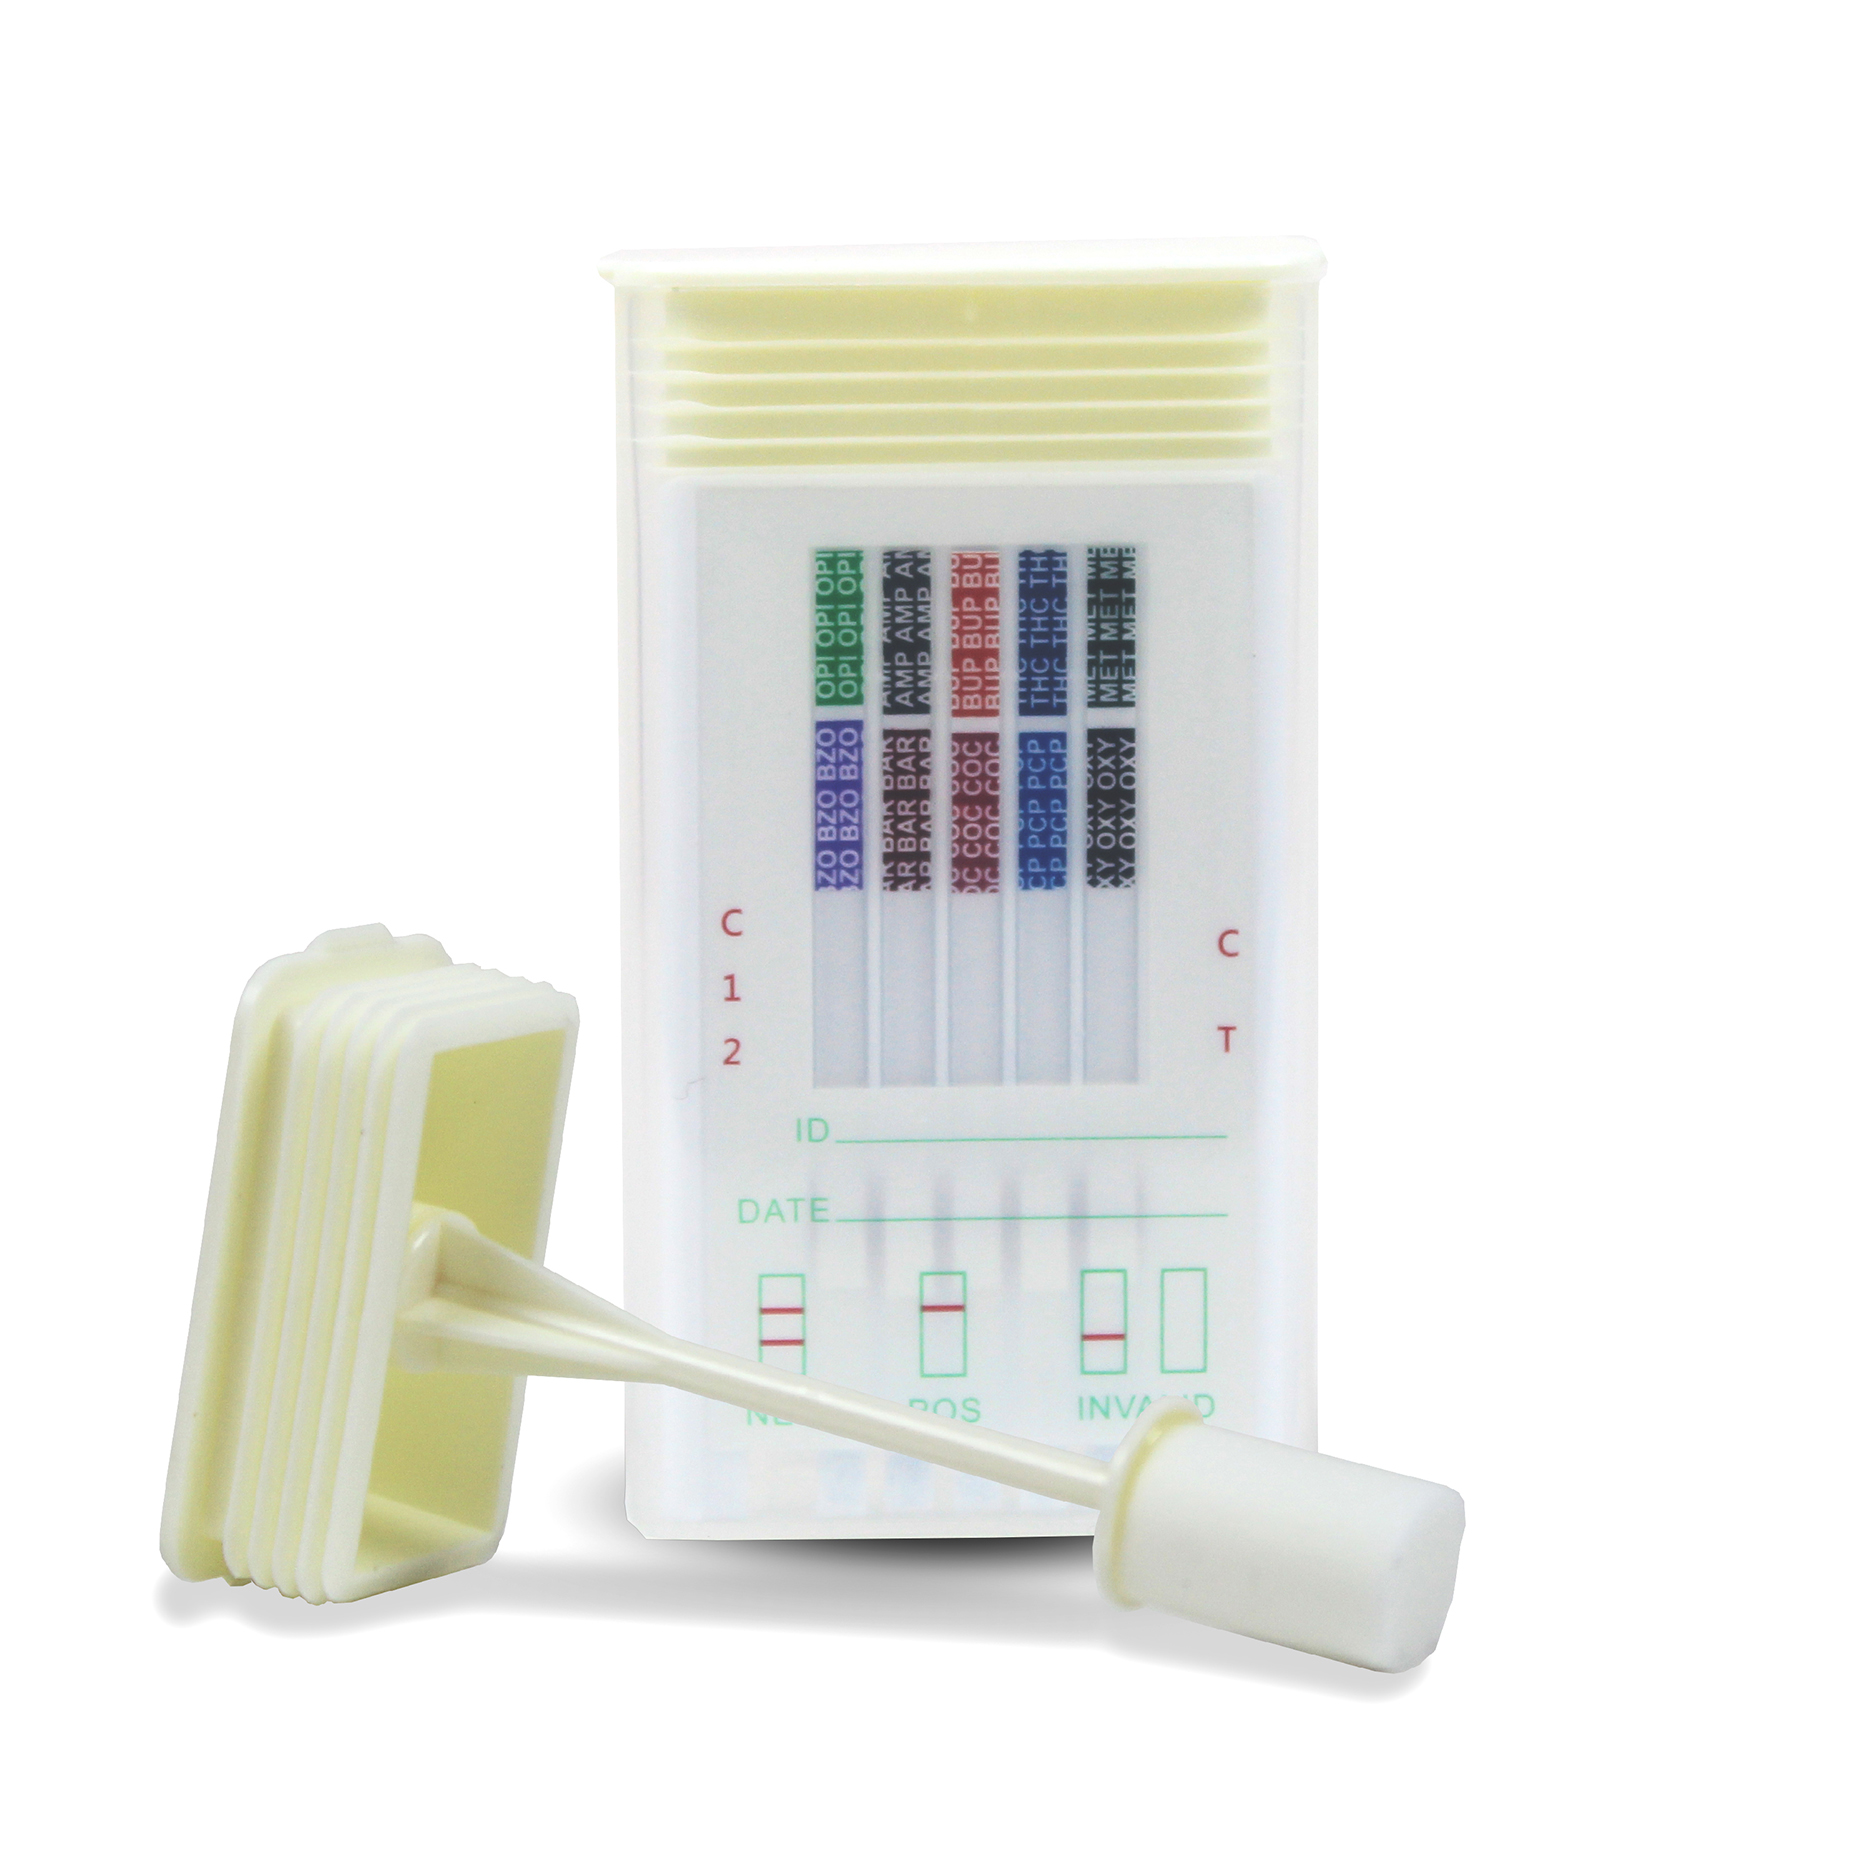 Discover One-Step - 10 Panel Saliva <span style='font-size:11px; color:#7d7d7d;'><br>THC, COC, AMP, OPI, mAMP, PCP, BAR, BZO, OXY, BUP</span>